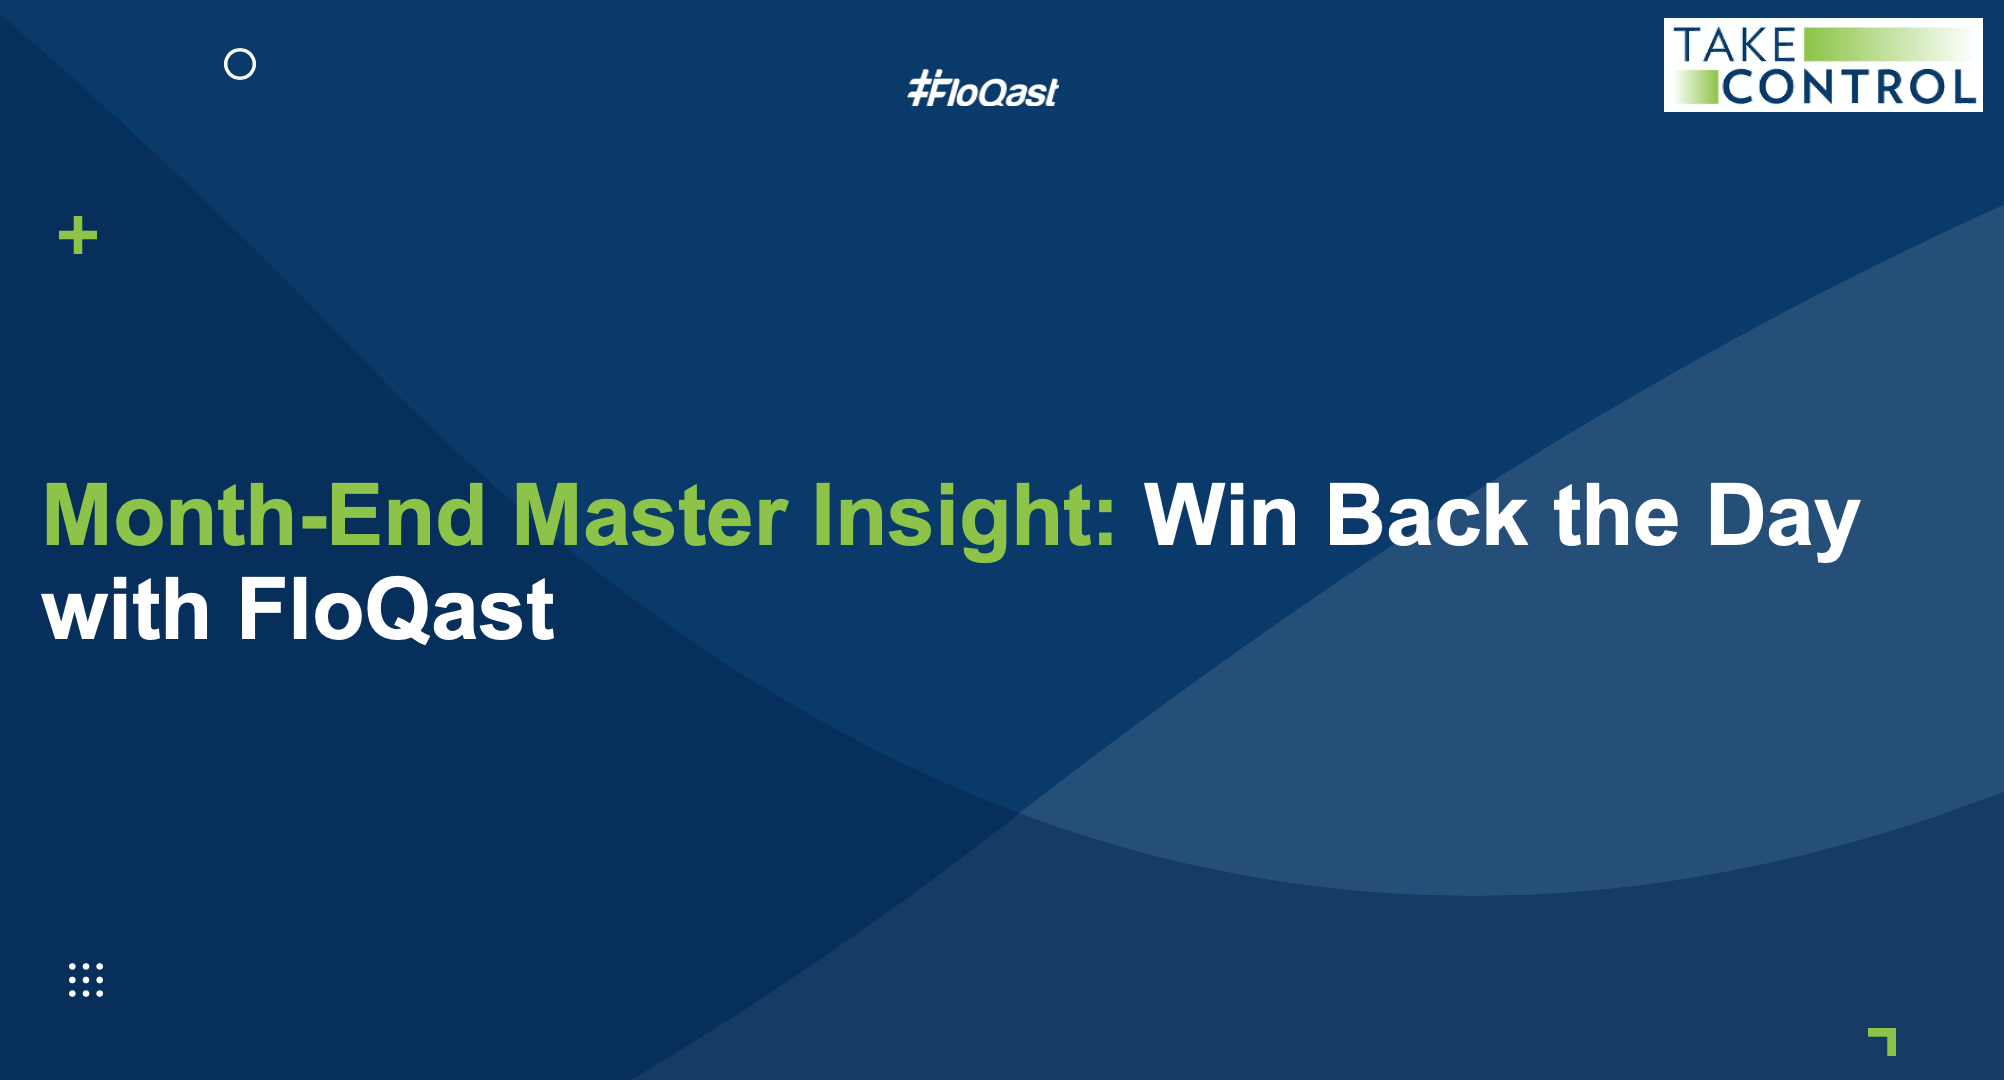 Month-End Master Insight, Win back the day